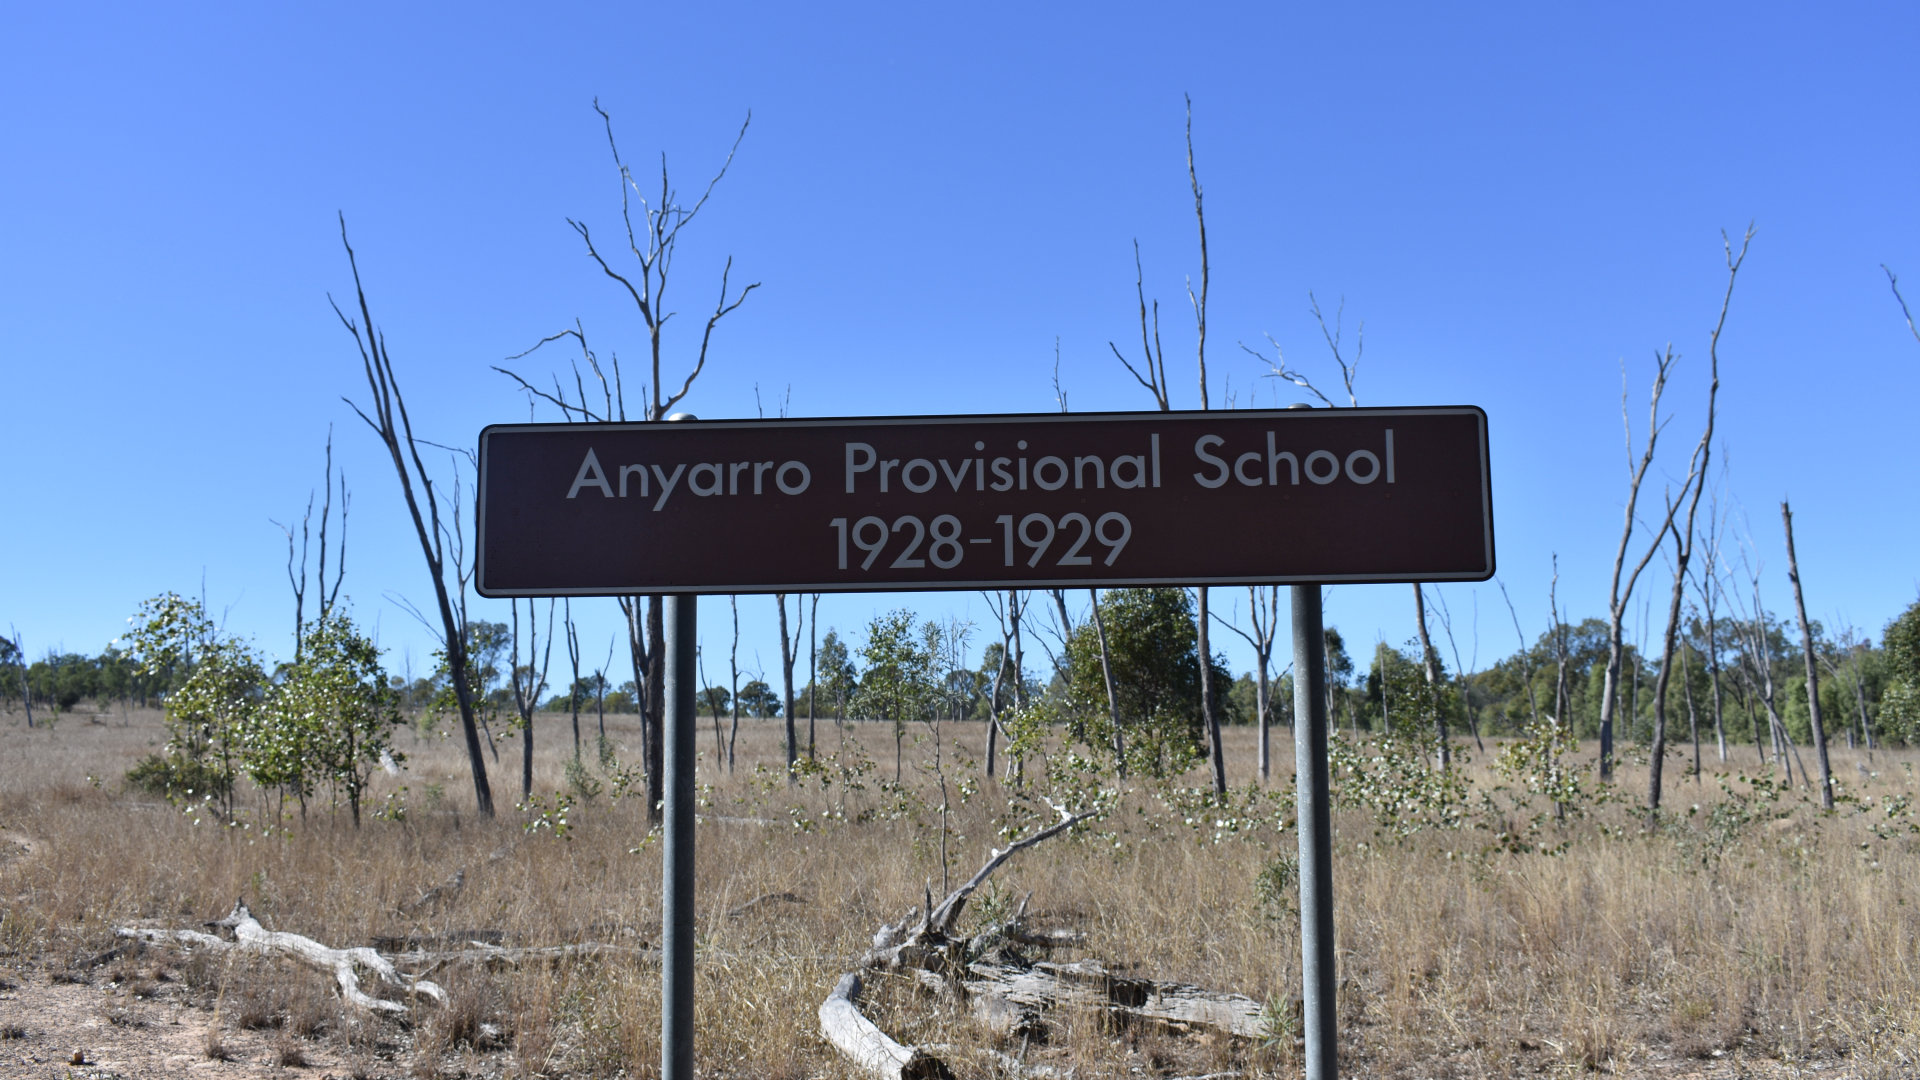 Brown sign for Anyarro Provisional School, 1928-1929, located south of Mulgildie near the old site of the Anyarro Railway Siding 